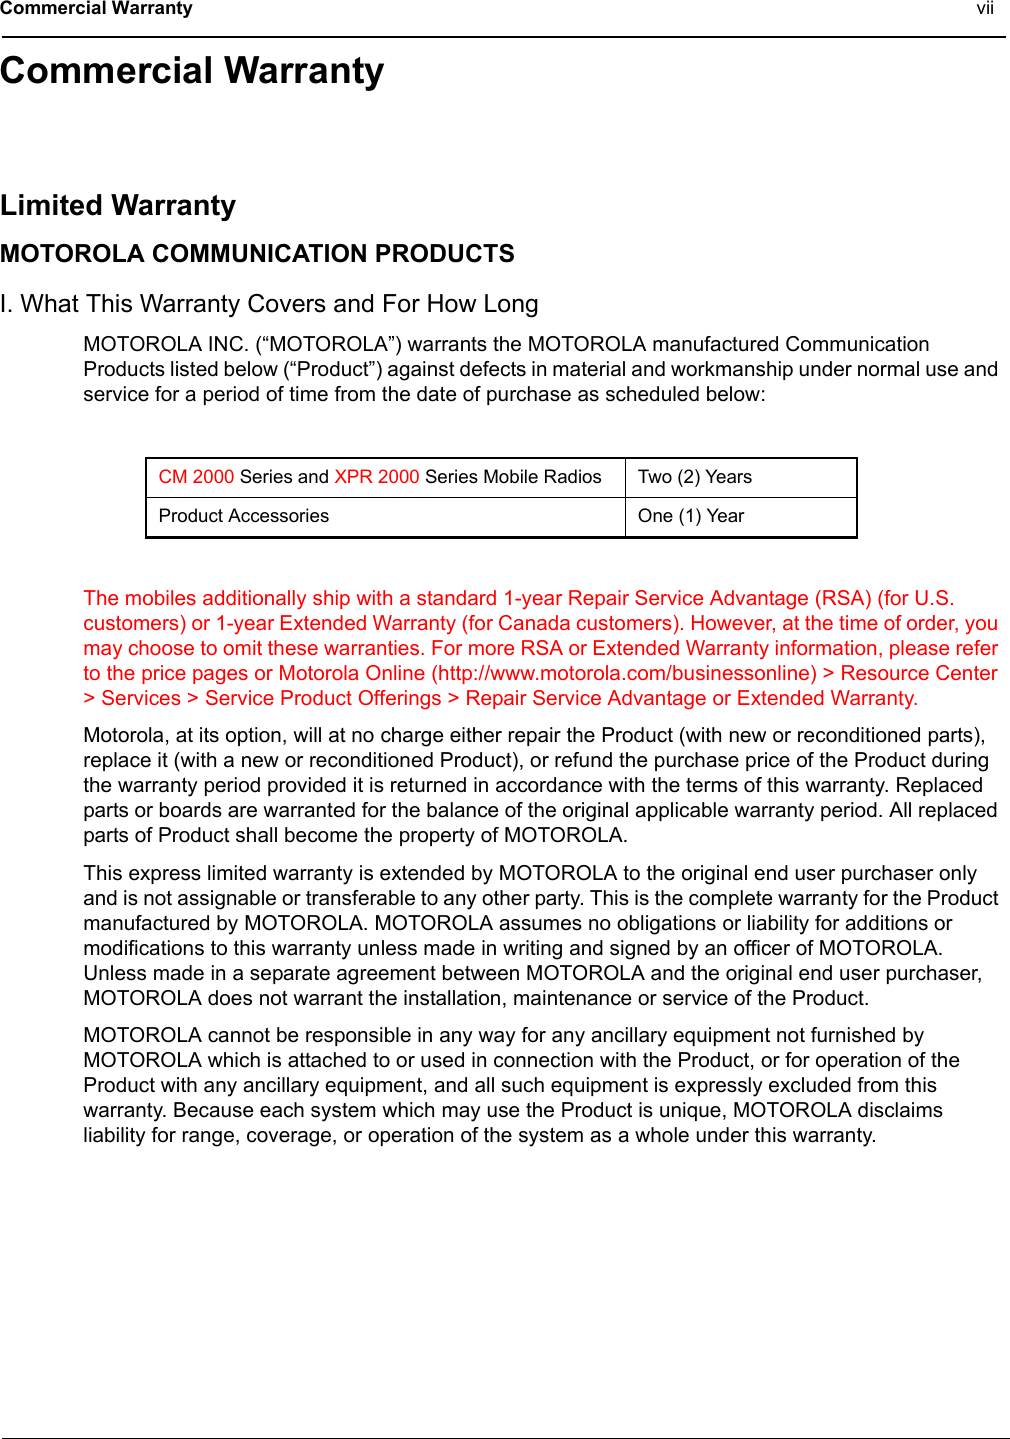 Commercial Warranty viiCommercial WarrantyLimited WarrantyMOTOROLA COMMUNICATION PRODUCTSI. What This Warranty Covers and For How LongMOTOROLA INC. (“MOTOROLA”) warrants the MOTOROLA manufactured Communication Products listed below (“Product”) against defects in material and workmanship under normal use and service for a period of time from the date of purchase as scheduled below:The mobiles additionally ship with a standard 1-year Repair Service Advantage (RSA) (for U.S. customers) or 1-year Extended Warranty (for Canada customers). However, at the time of order, you may choose to omit these warranties. For more RSA or Extended Warranty information, please refer to the price pages or Motorola Online (http://www.motorola.com/businessonline) &gt; Resource Center &gt; Services &gt; Service Product Offerings &gt; Repair Service Advantage or Extended Warranty.Motorola, at its option, will at no charge either repair the Product (with new or reconditioned parts), replace it (with a new or reconditioned Product), or refund the purchase price of the Product during the warranty period provided it is returned in accordance with the terms of this warranty. Replaced parts or boards are warranted for the balance of the original applicable warranty period. All replaced parts of Product shall become the property of MOTOROLA.This express limited warranty is extended by MOTOROLA to the original end user purchaser only and is not assignable or transferable to any other party. This is the complete warranty for the Product manufactured by MOTOROLA. MOTOROLA assumes no obligations or liability for additions or modifications to this warranty unless made in writing and signed by an officer of MOTOROLA. Unless made in a separate agreement between MOTOROLA and the original end user purchaser, MOTOROLA does not warrant the installation, maintenance or service of the Product.MOTOROLA cannot be responsible in any way for any ancillary equipment not furnished by MOTOROLA which is attached to or used in connection with the Product, or for operation of the Product with any ancillary equipment, and all such equipment is expressly excluded from this warranty. Because each system which may use the Product is unique, MOTOROLA disclaims liability for range, coverage, or operation of the system as a whole under this warranty.CM 2000 Series and XPR 2000 Series Mobile Radios Two (2) YearsProduct Accessories One (1) Year